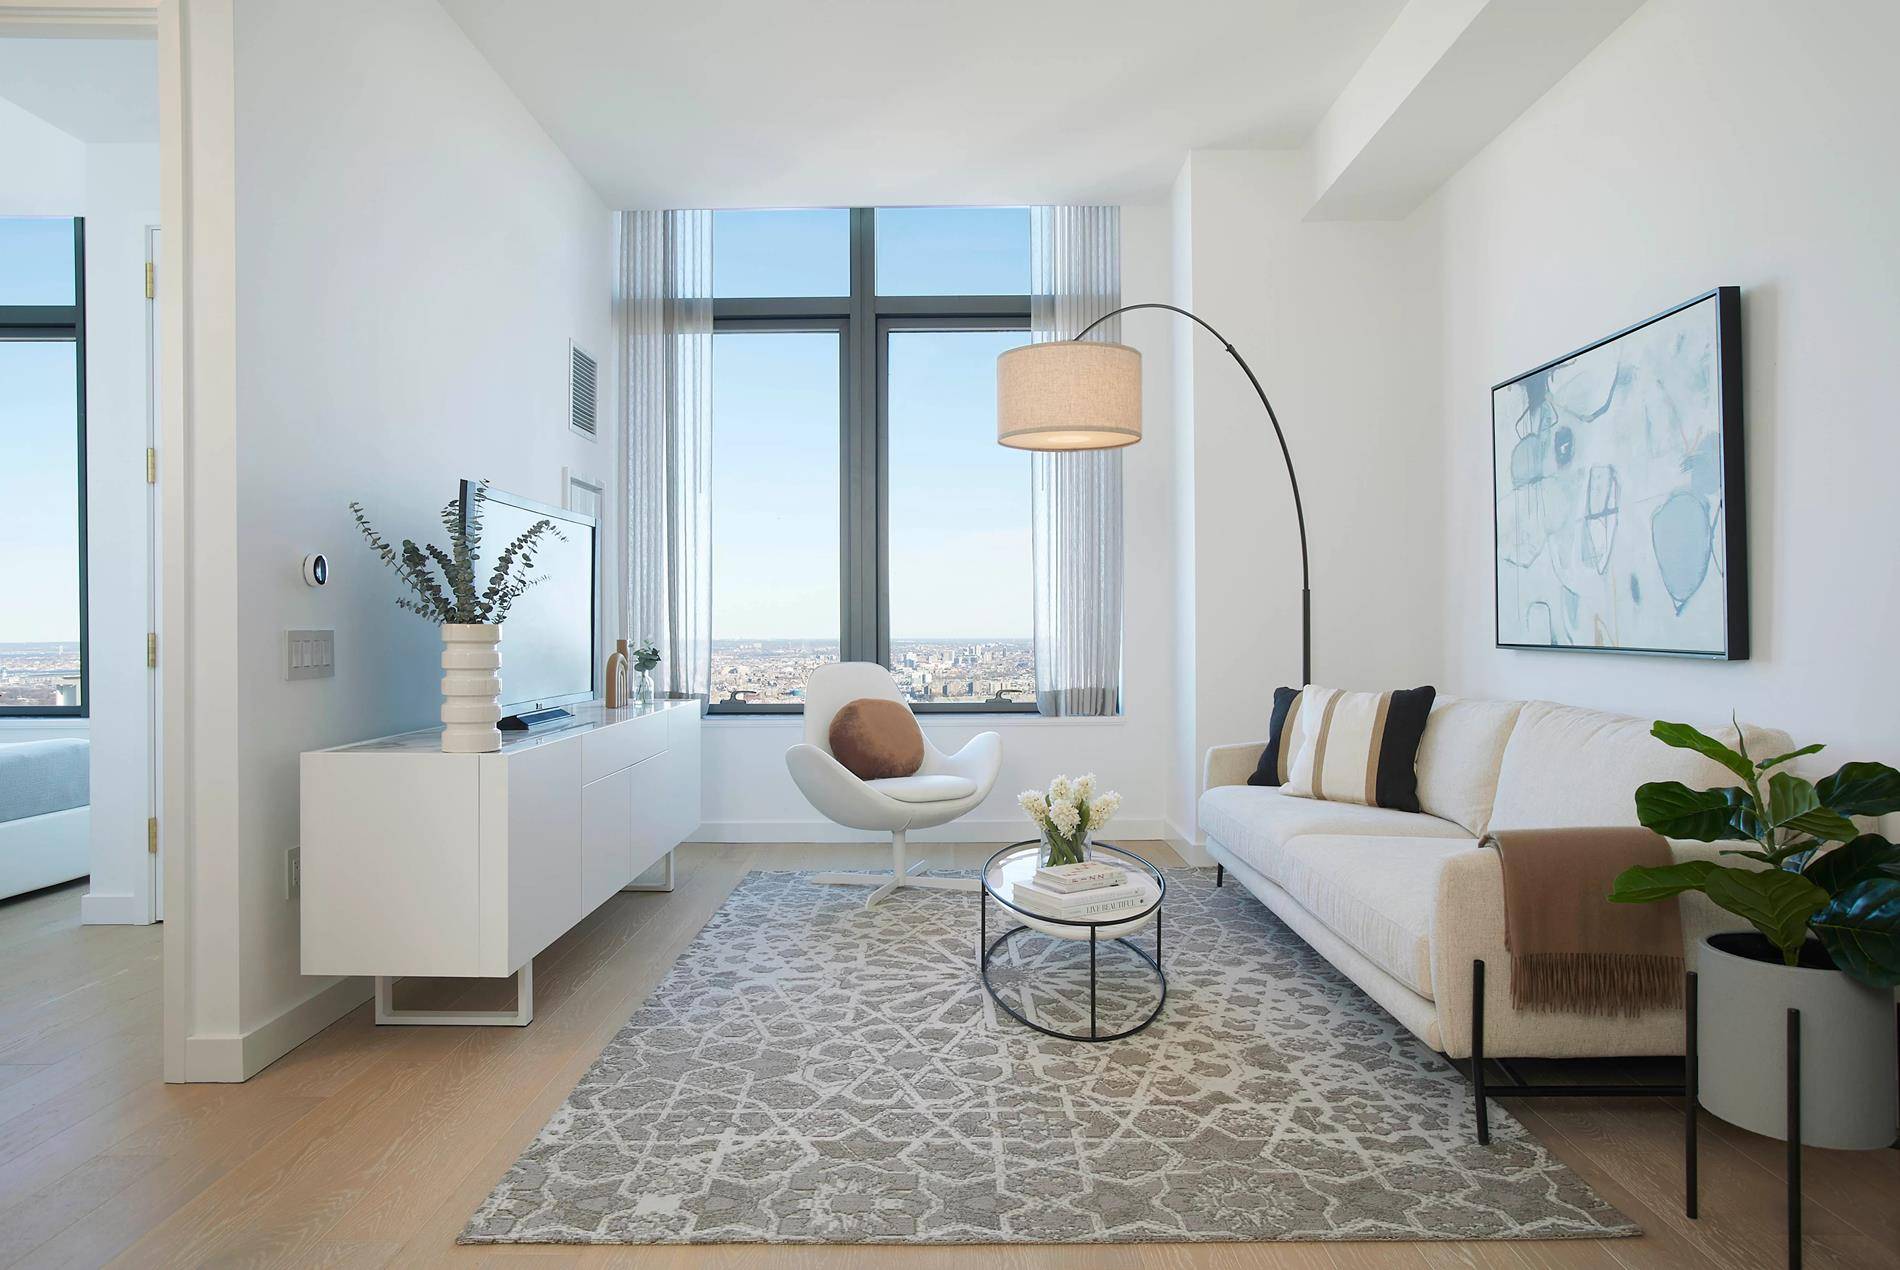 Available in Early June Enjoy breathtaking Manhattan views in this stunning brand new 2BR 2BA apartment at luxurious Skyline Tower.